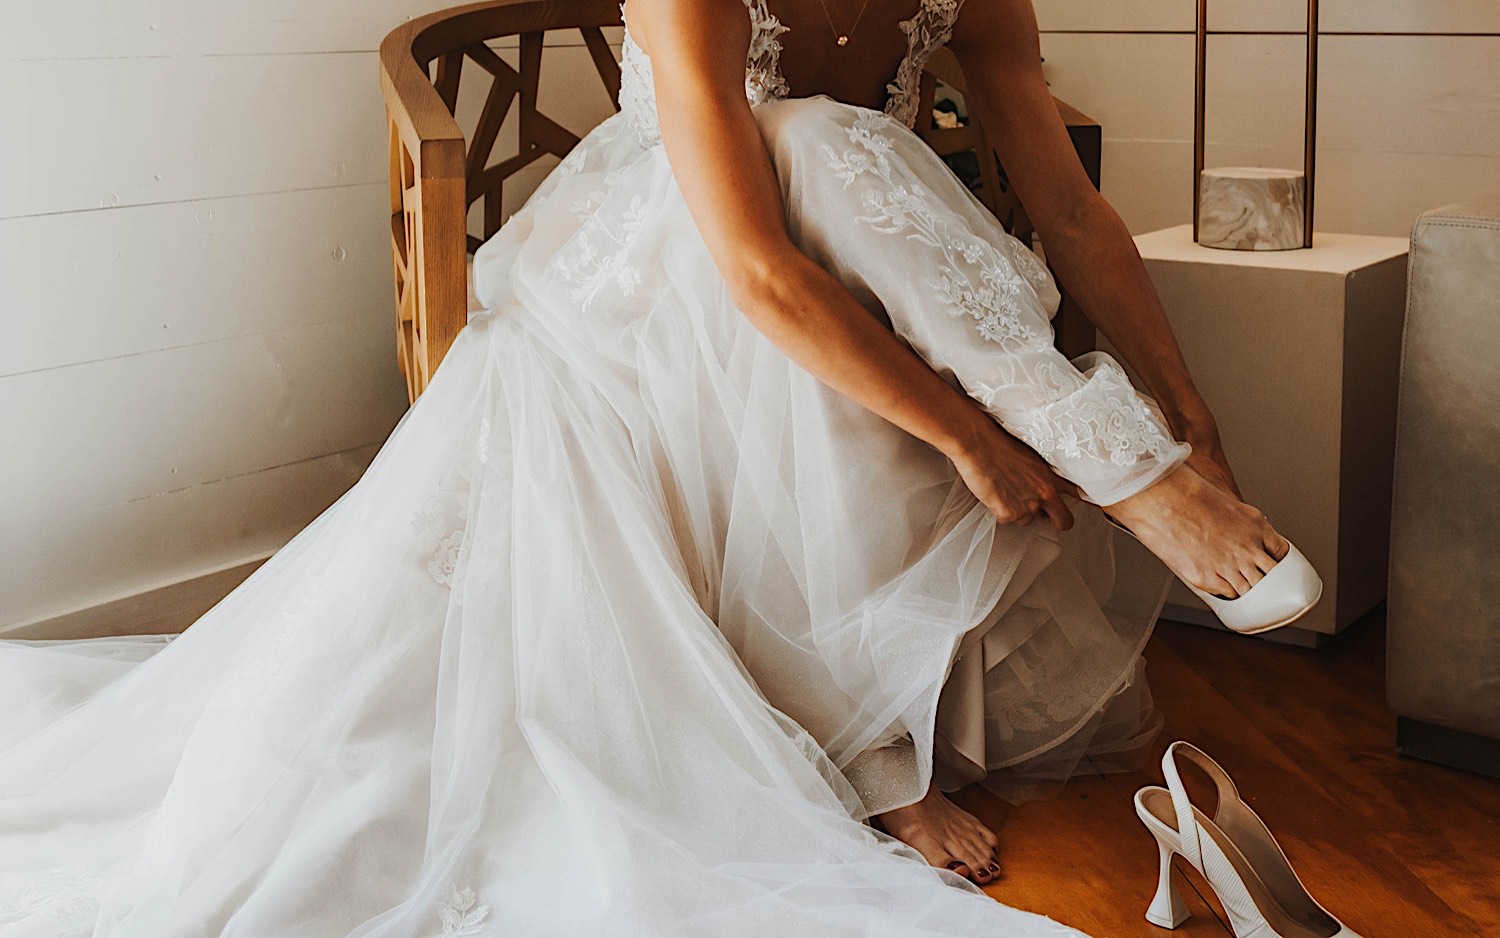 A bride sits in a chair in her wedding dress and puts on her shoes while in the getting ready space at Legacy Hill Farm